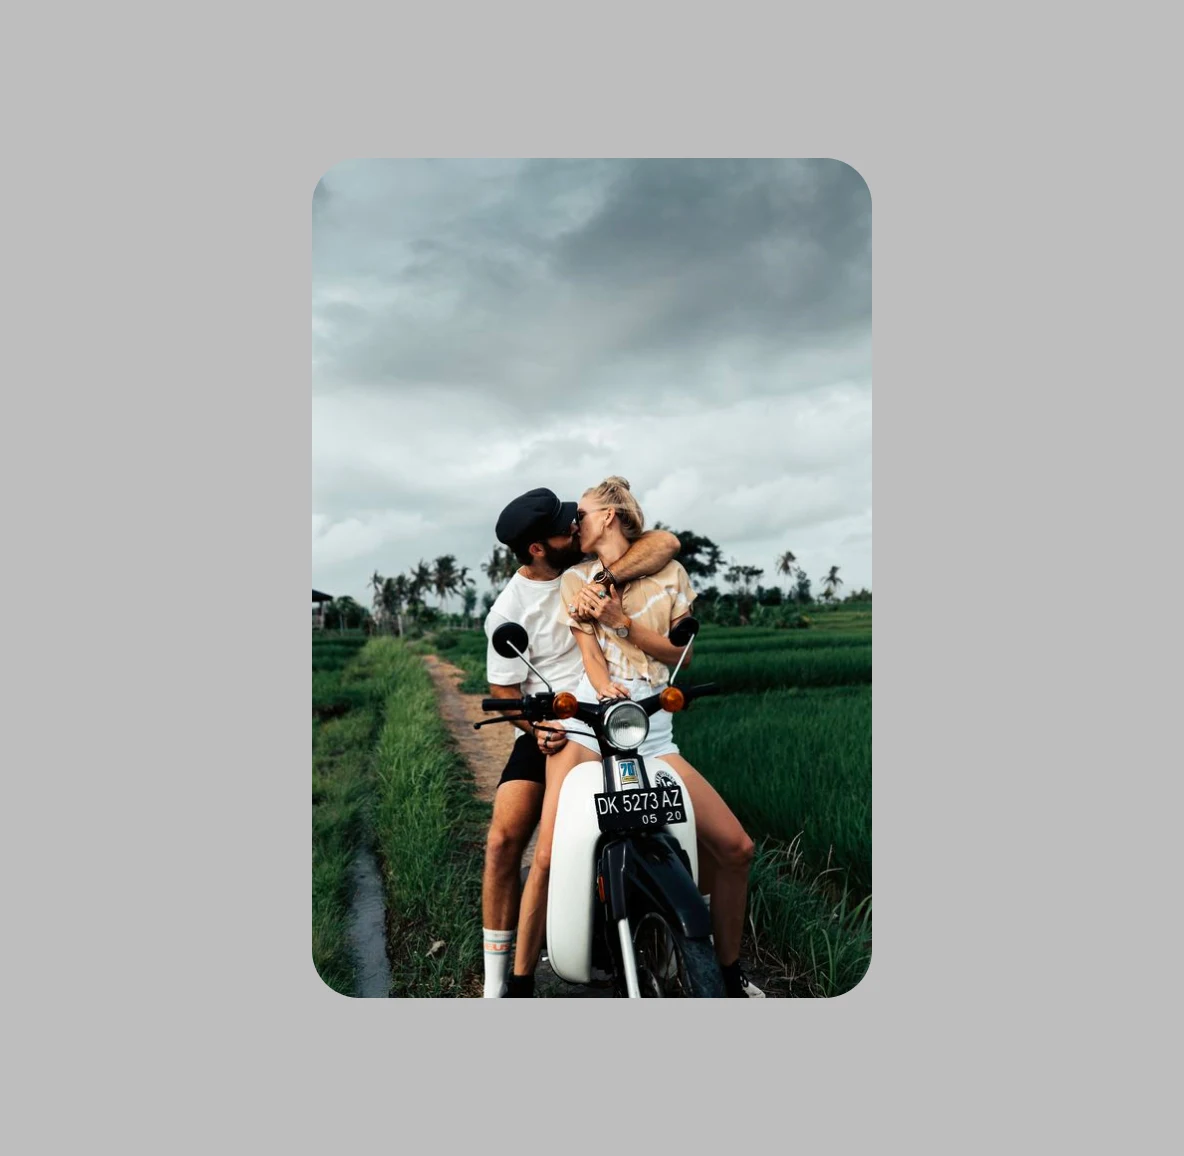 Couple embracing on a motorcycle